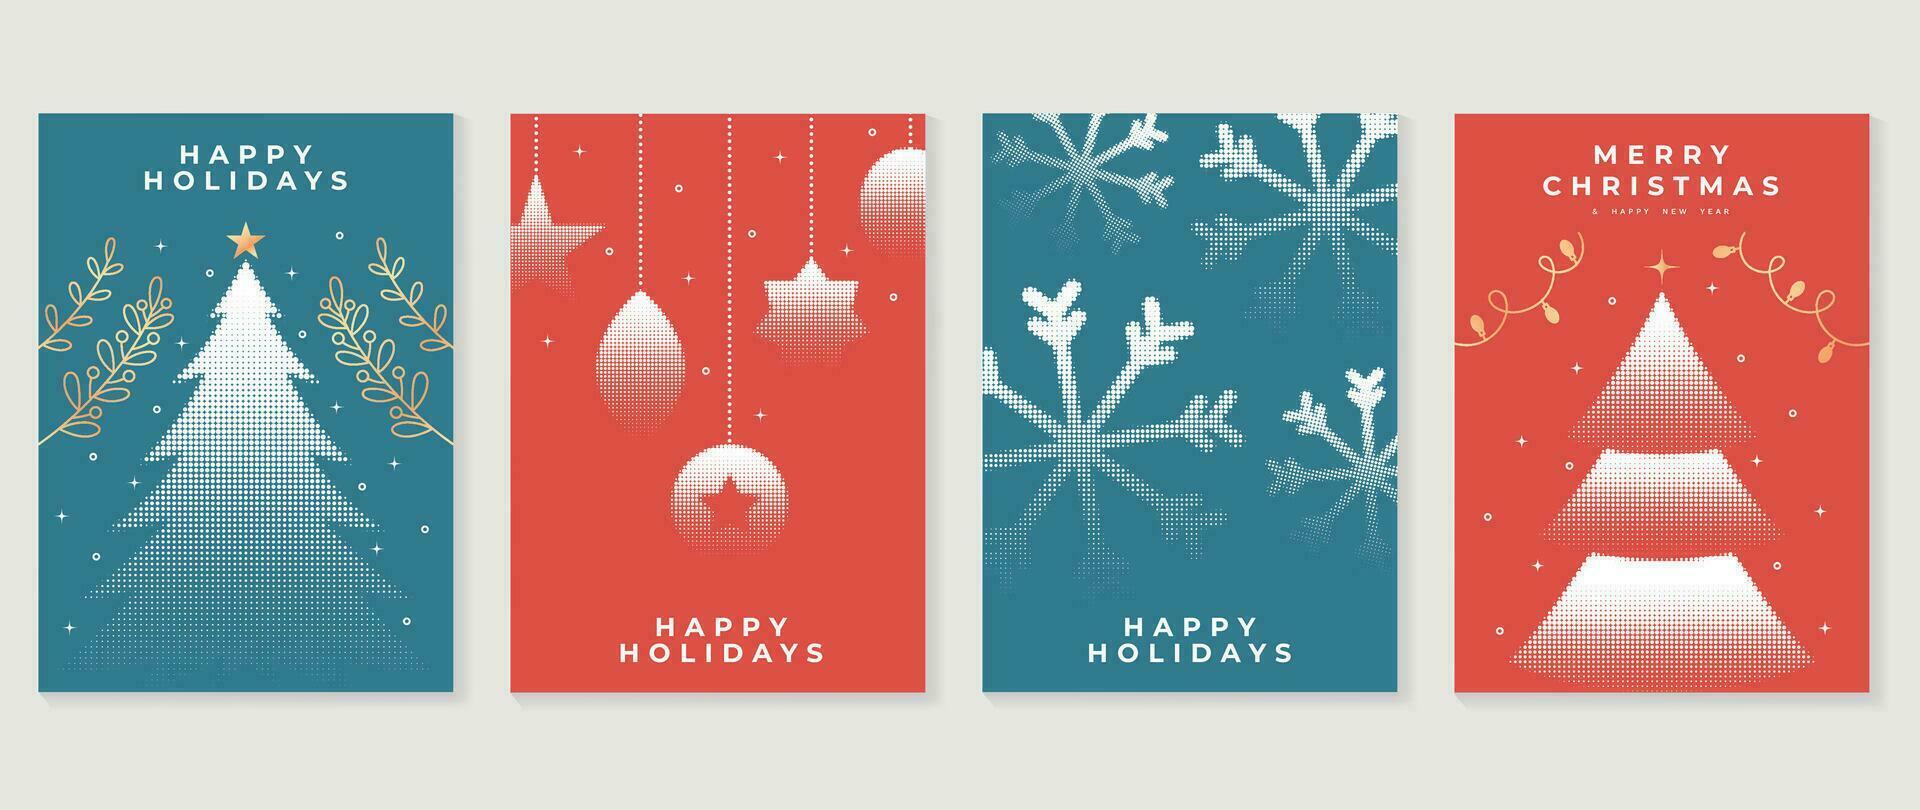 Merry christmas and happy new year card design vector. Elements of decorative bauble ball, christmas tree, snowflake halftone texture. Art design for card, poster, cover, banner, decoration. vector